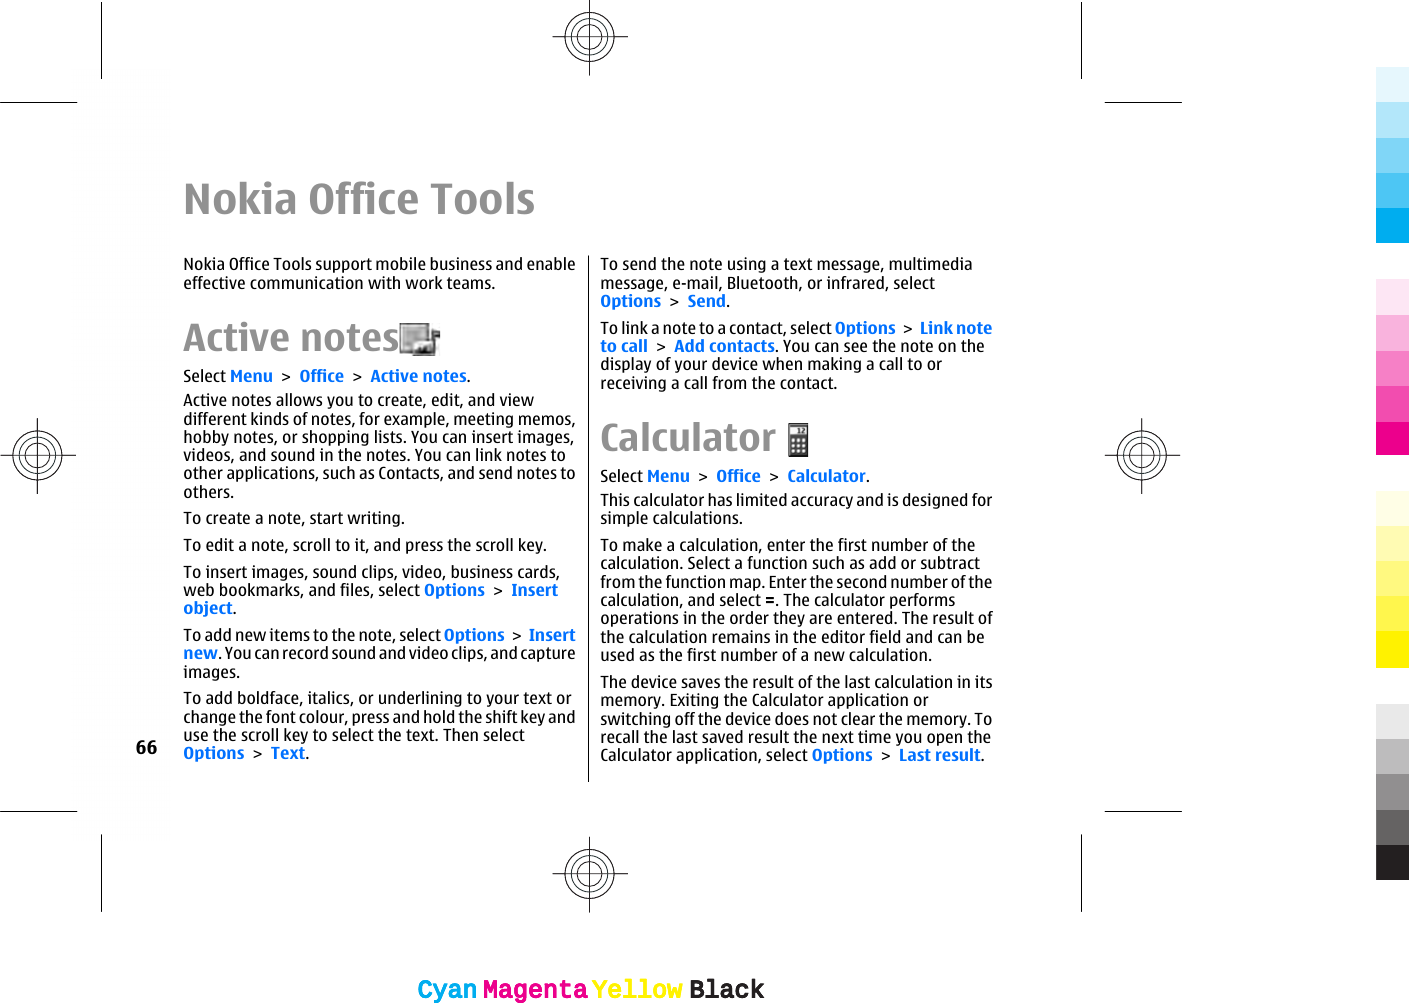 Nokia Office ToolsNokia Office Tools support mobile business and enableeffective communication with work teams.Active notesSelect Menu &gt; Office &gt; Active notes.Active notes allows you to create, edit, and viewdifferent kinds of notes, for example, meeting memos,hobby notes, or shopping lists. You can insert images,videos, and sound in the notes. You can link notes toother applications, such as Contacts, and send notes toothers.To create a note, start writing.To edit a note, scroll to it, and press the scroll key.To insert images, sound clips, video, business cards,web bookmarks, and files, select Options &gt; Insertobject.To add new items to the note, select Options &gt; Insertnew. You can record sound and video clips, and captureimages.To add boldface, italics, or underlining to your text orchange the font colour, press and hold the shift key anduse the scroll key to select the text. Then selectOptions &gt; Text.To send the note using a text message, multimediamessage, e-mail, Bluetooth, or infrared, selectOptions &gt; Send.To link a note to a contact, select Options &gt; Link noteto call &gt; Add contacts. You can see the note on thedisplay of your device when making a call to orreceiving a call from the contact.CalculatorSelect Menu &gt; Office &gt; Calculator.This calculator has limited accuracy and is designed forsimple calculations.To make a calculation, enter the first number of thecalculation. Select a function such as add or subtractfrom the function map. Enter the second number of thecalculation, and select =. The calculator performsoperations in the order they are entered. The result ofthe calculation remains in the editor field and can beused as the first number of a new calculation.The device saves the result of the last calculation in itsmemory. Exiting the Calculator application orswitching off the device does not clear the memory. Torecall the last saved result the next time you open theCalculator application, select Options &gt; Last result.66CyanCyanMagentaMagentaYellowYellowBlackBlackCyanCyanMagentaMagentaYellowYellowBlackBlack